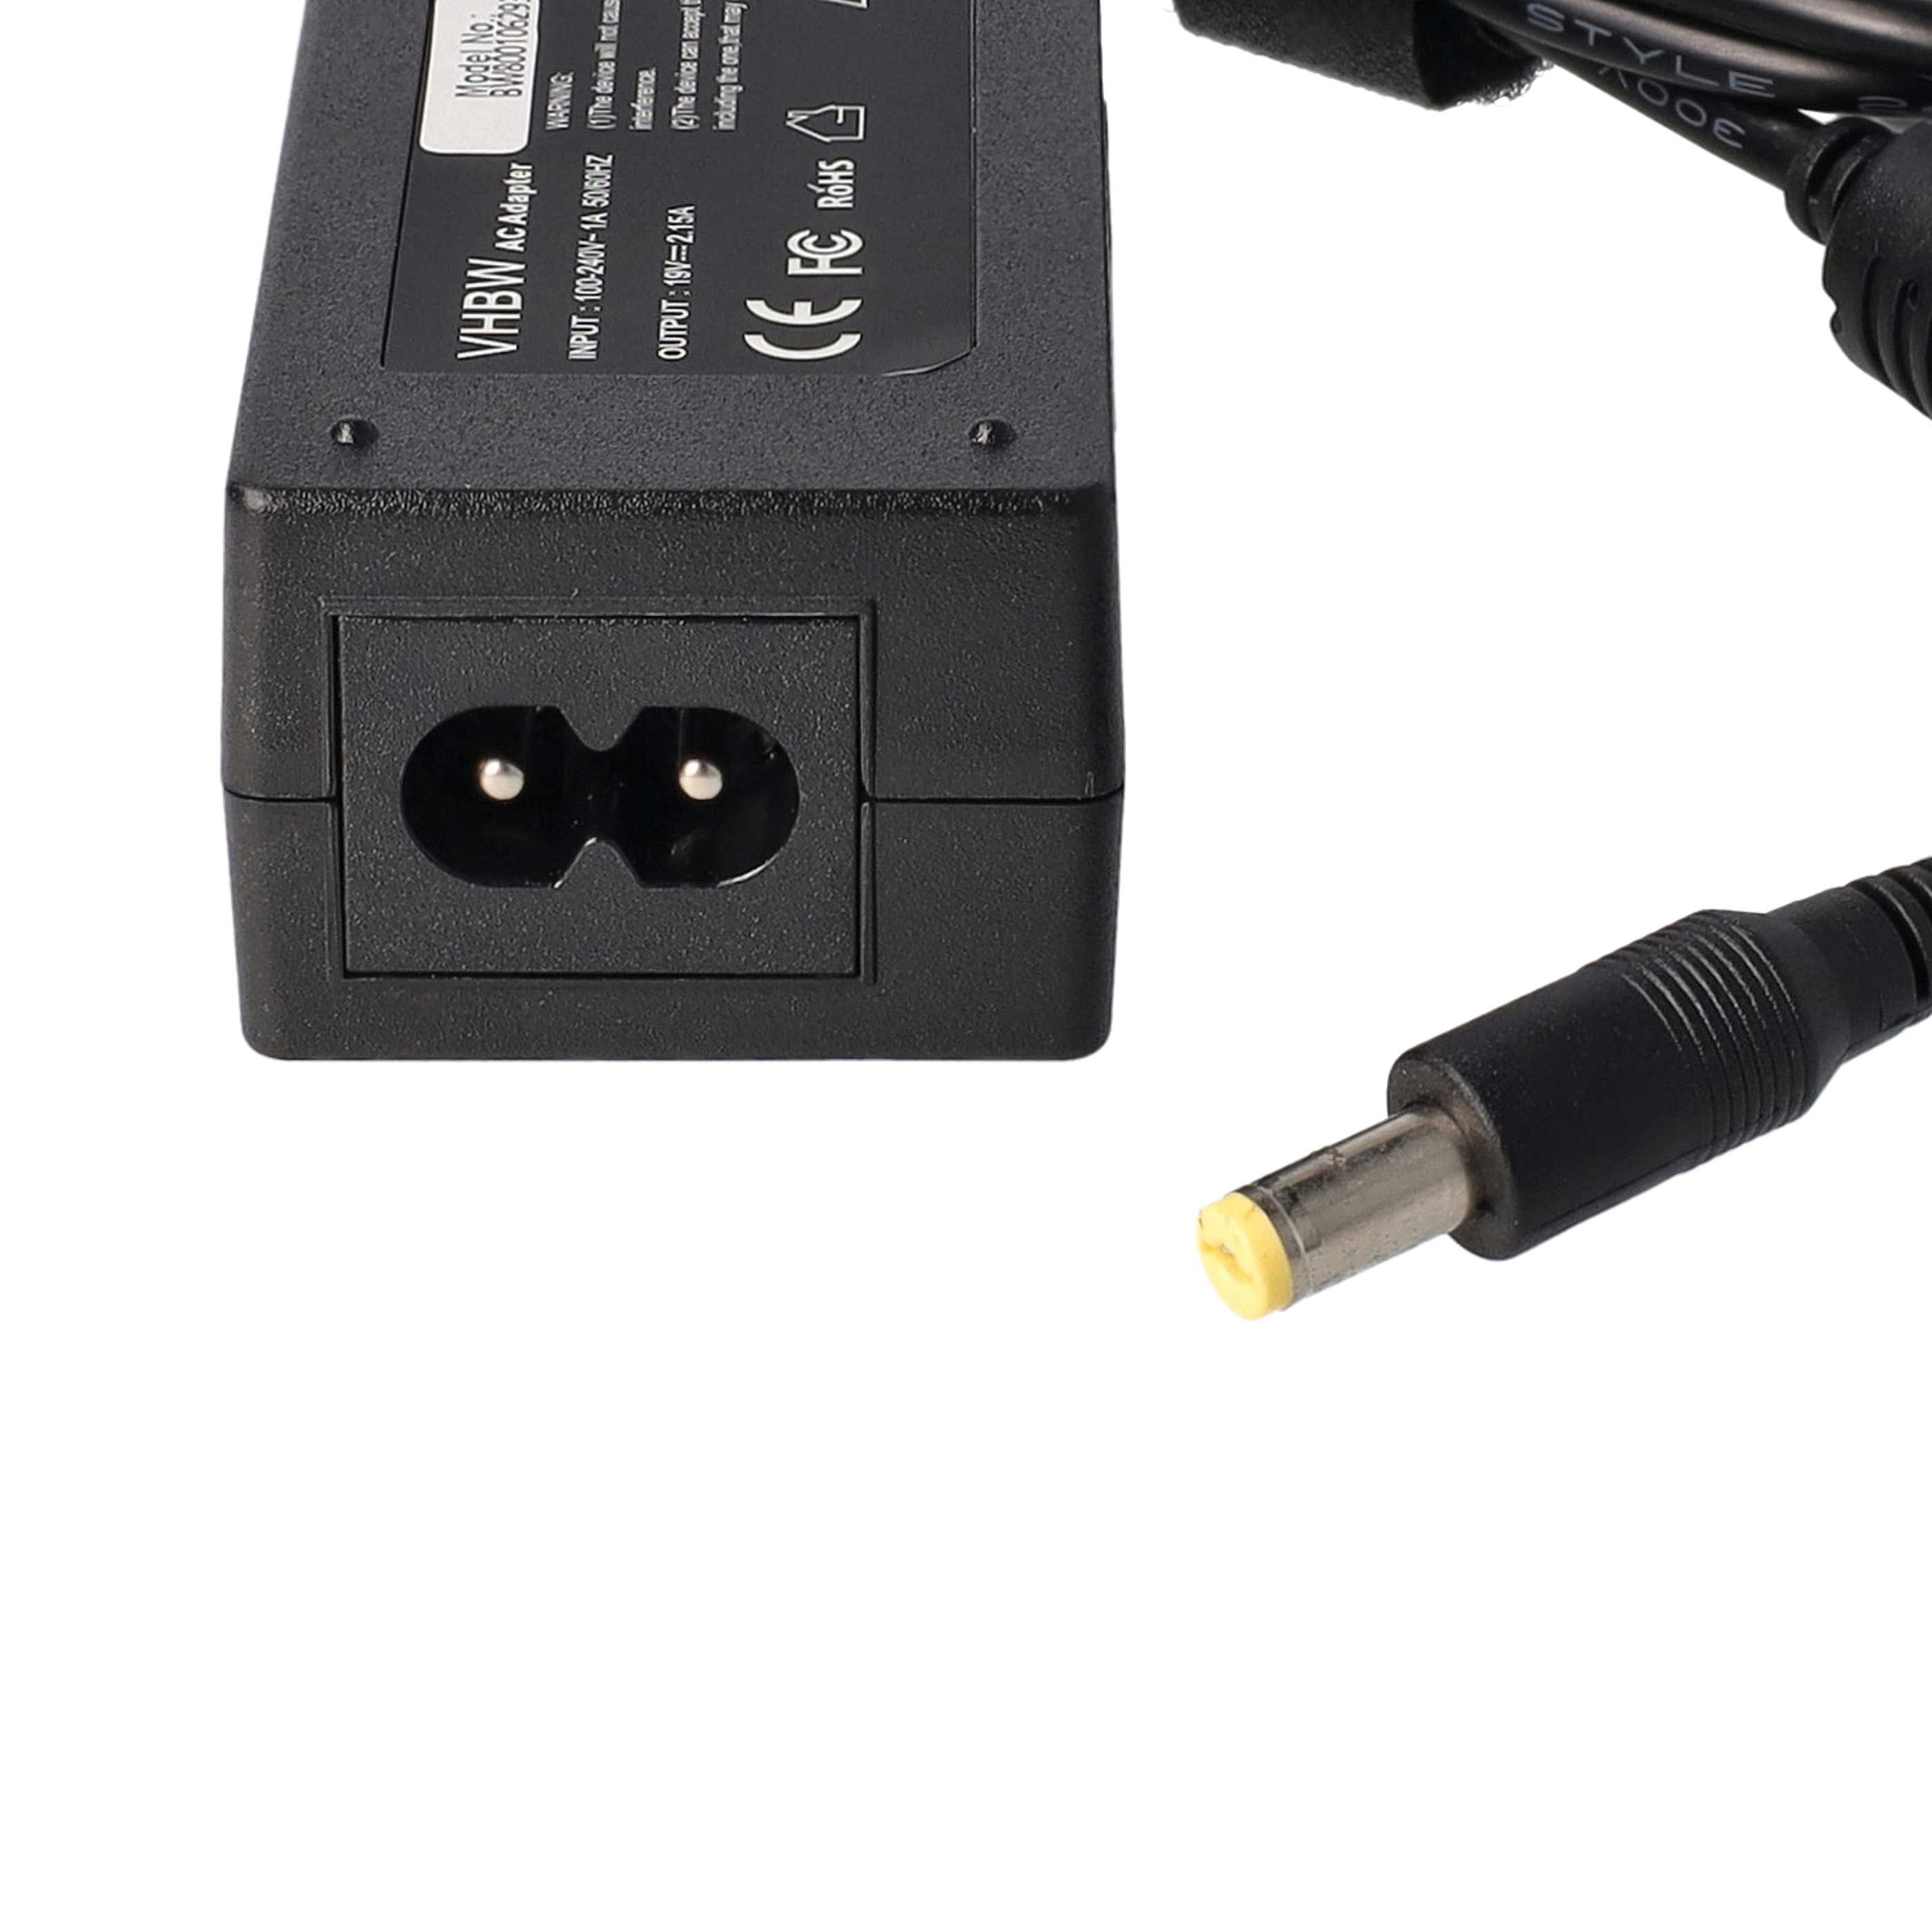 Mains Power Adapter replaces Acer A045R016L, A13-045N2A, ADP-45HE BB, ADP-40TH A for AcerNotebook, 40 W